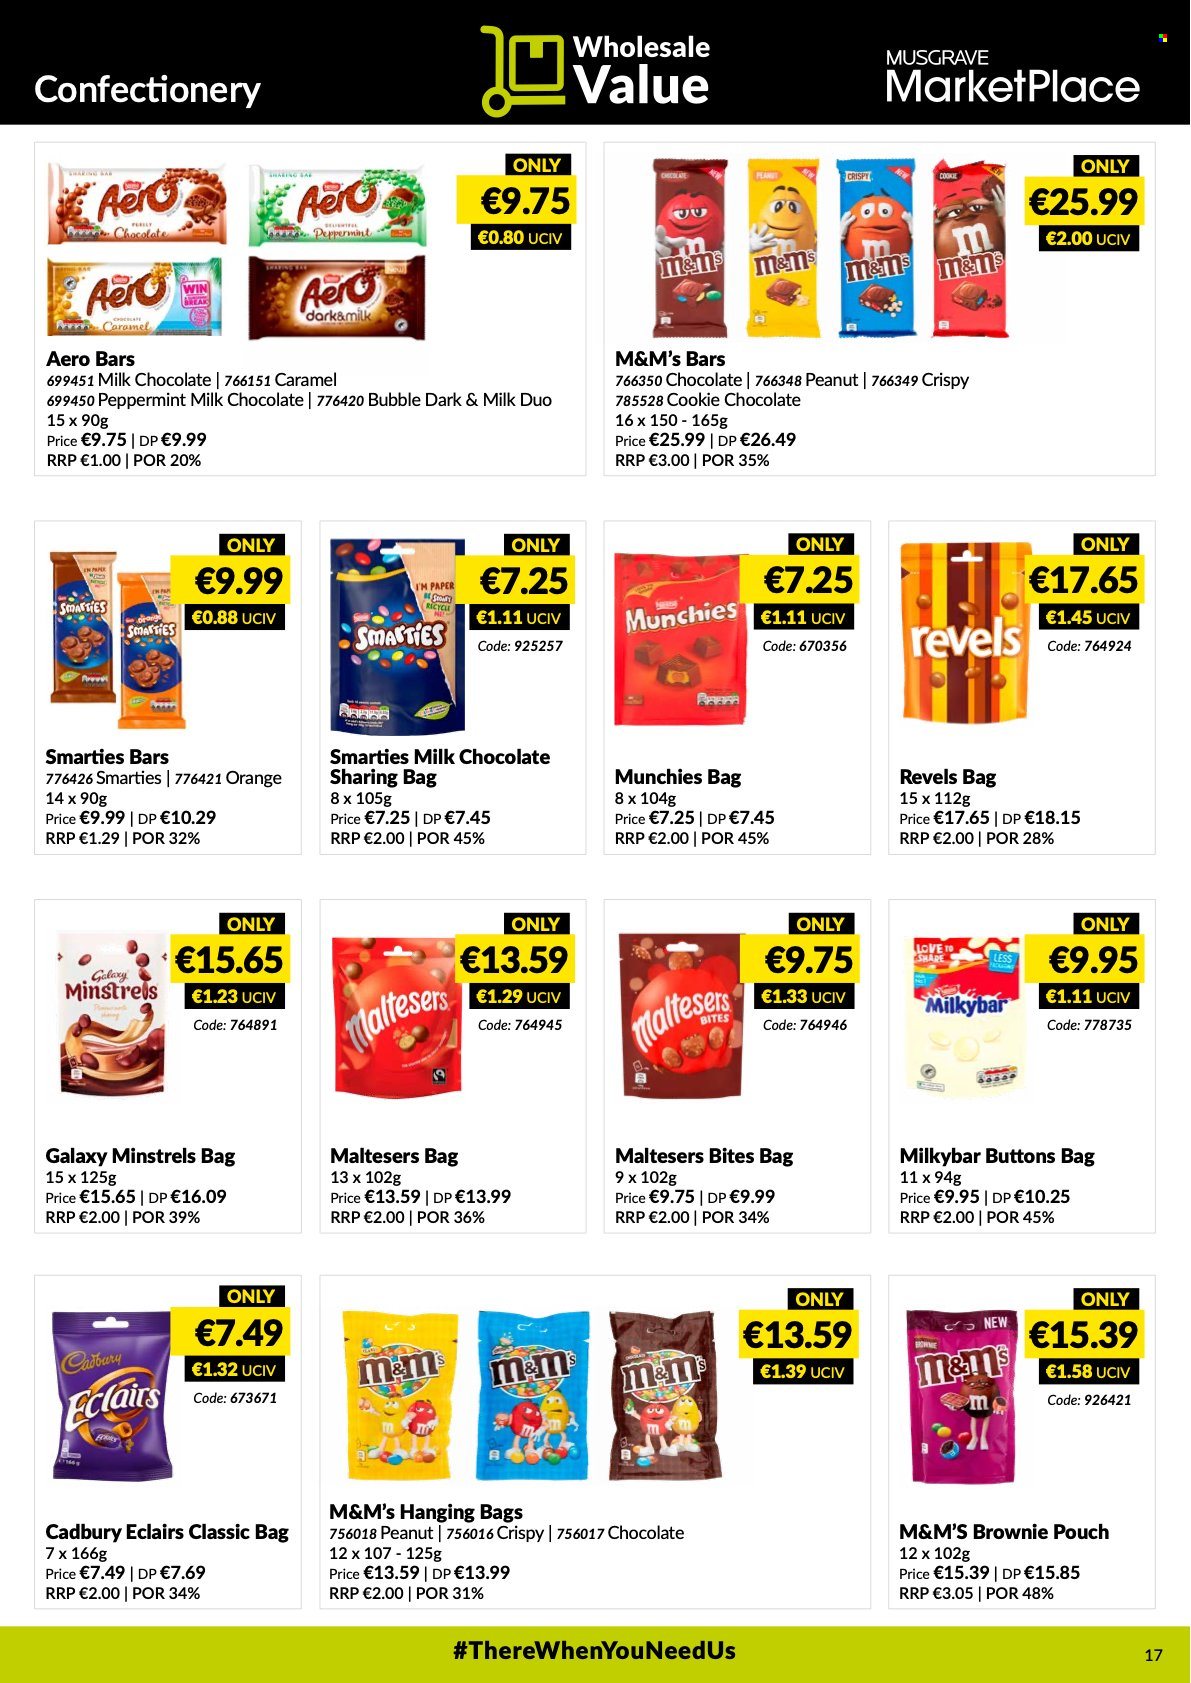 thumbnail - MUSGRAVE Market Place offer  - 16.01.2022 - 12.02.2022 - Sales products - brownies, oranges, milk chocolate, chocolate, M&M's, Smarties, Maltesers, Cadbury, Milkybar, caramel, paper. Page 17.